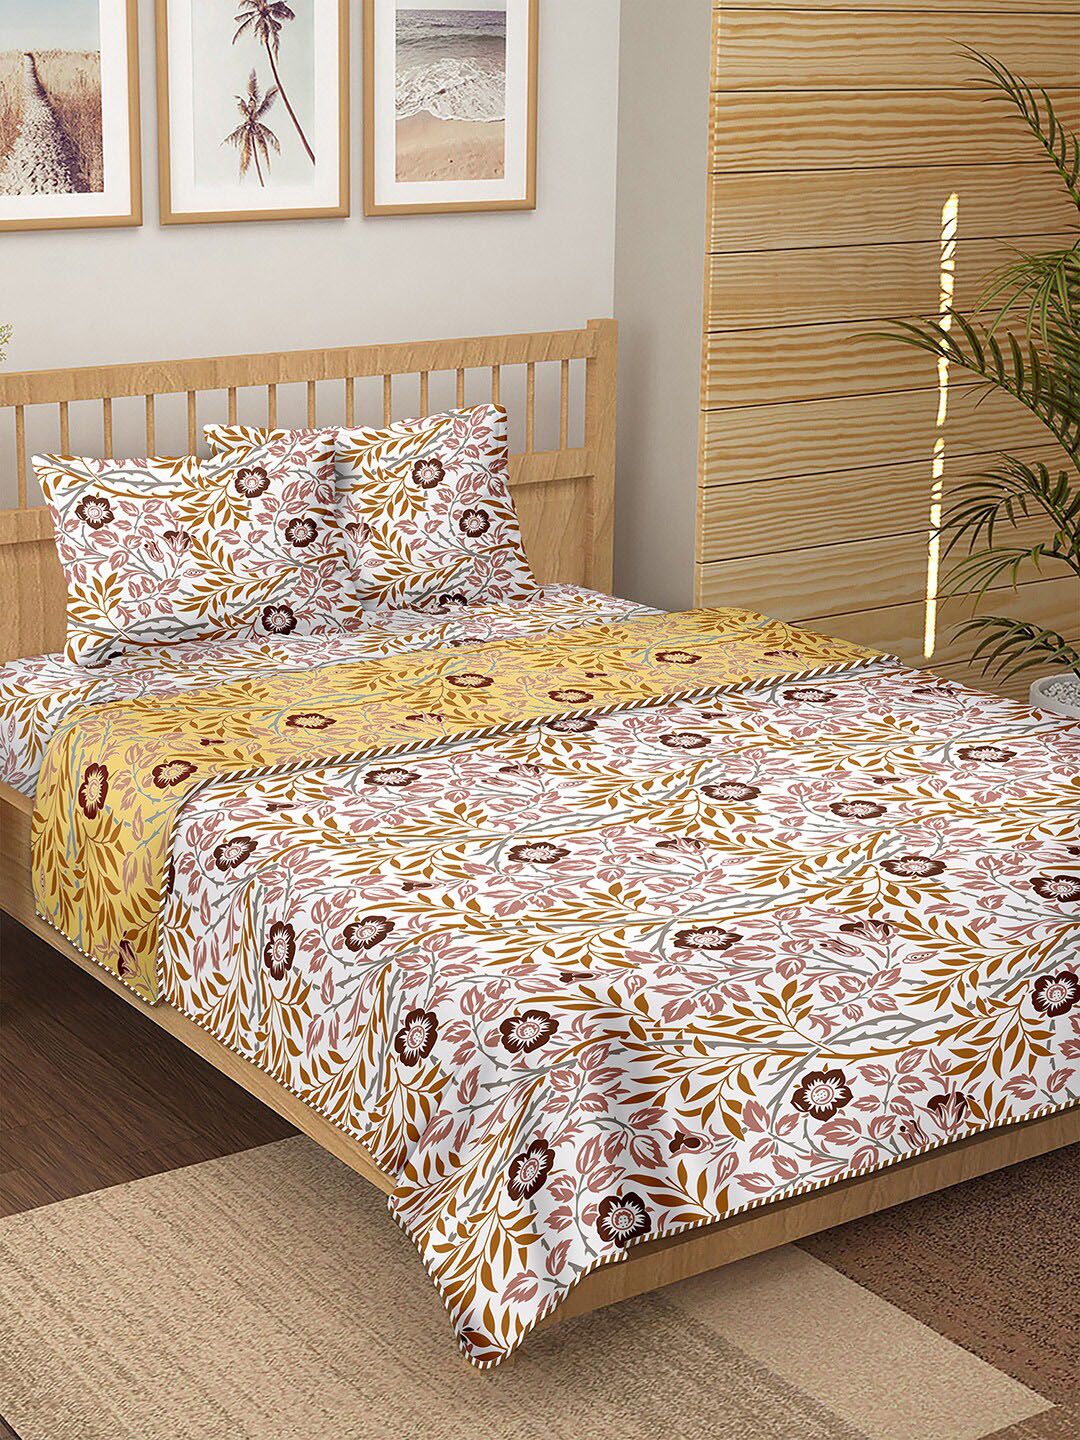 BELLA CASA Brown & White Floral Printed Cotton Double King Bedding Set Price in India